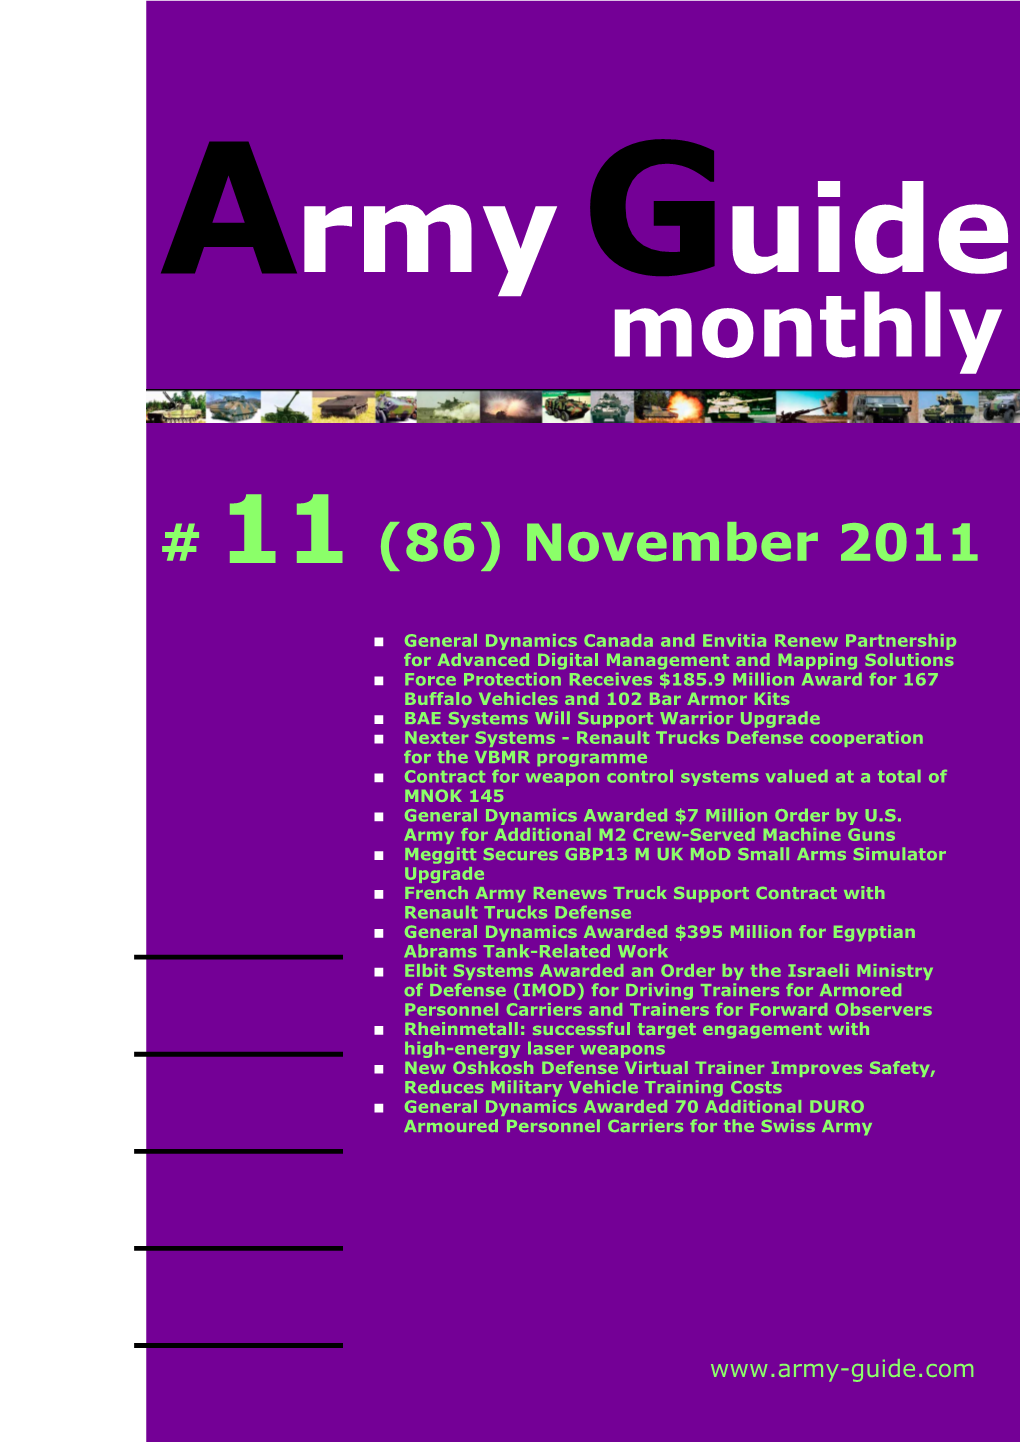 Army Guide Monthly • Issue #11 (86) • November 2011